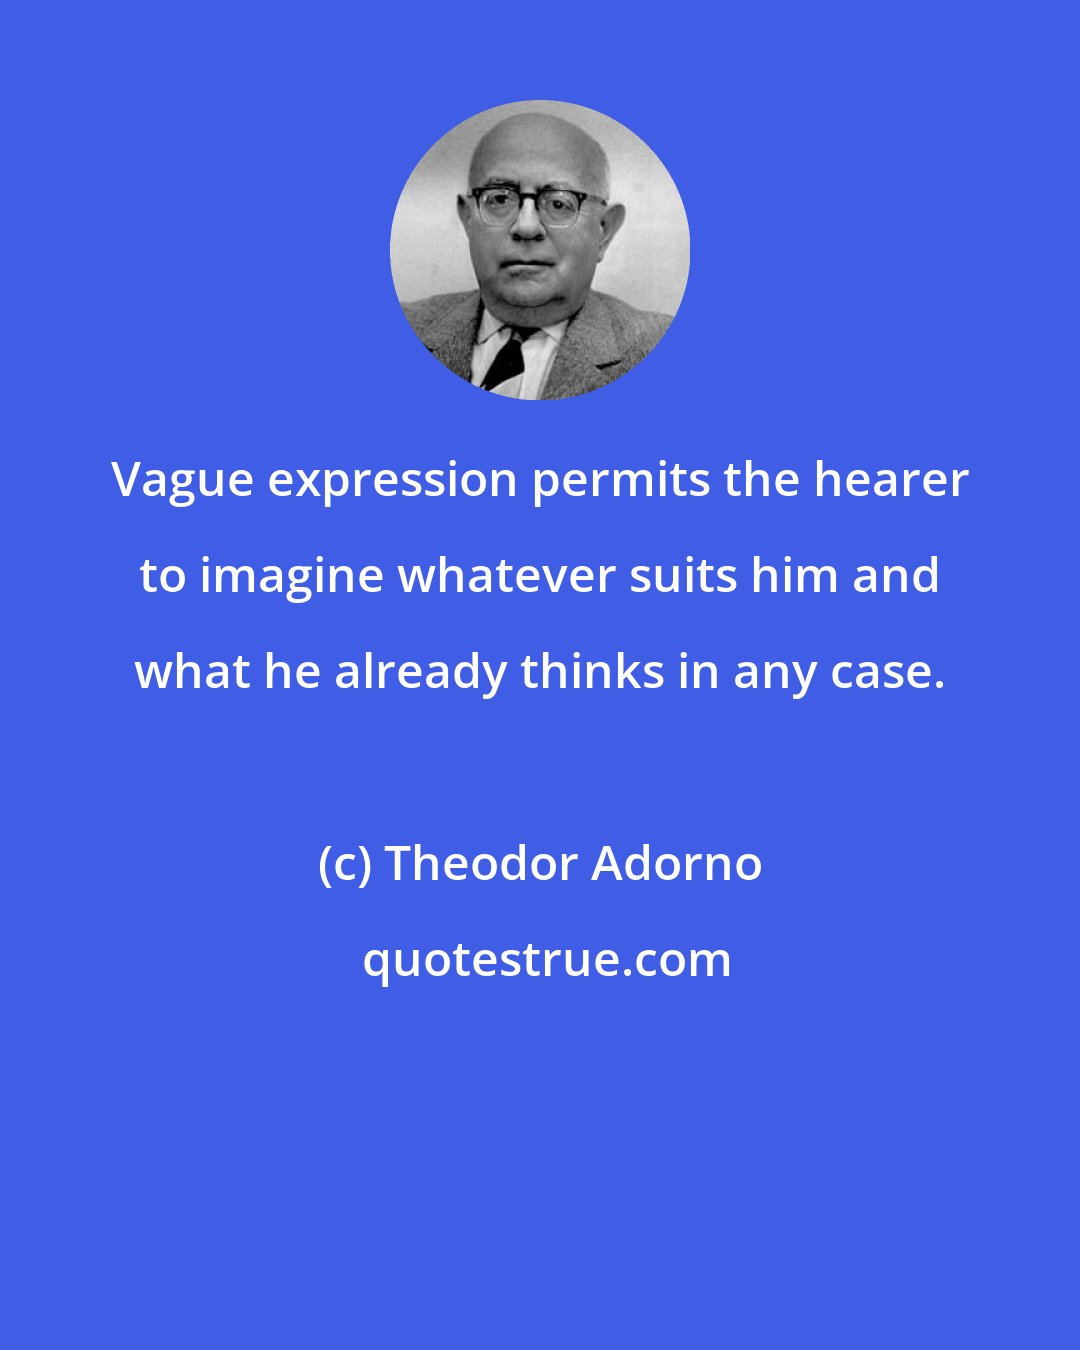 Theodor Adorno: Vague expression permits the hearer to imagine whatever suits him and what he already thinks in any case.